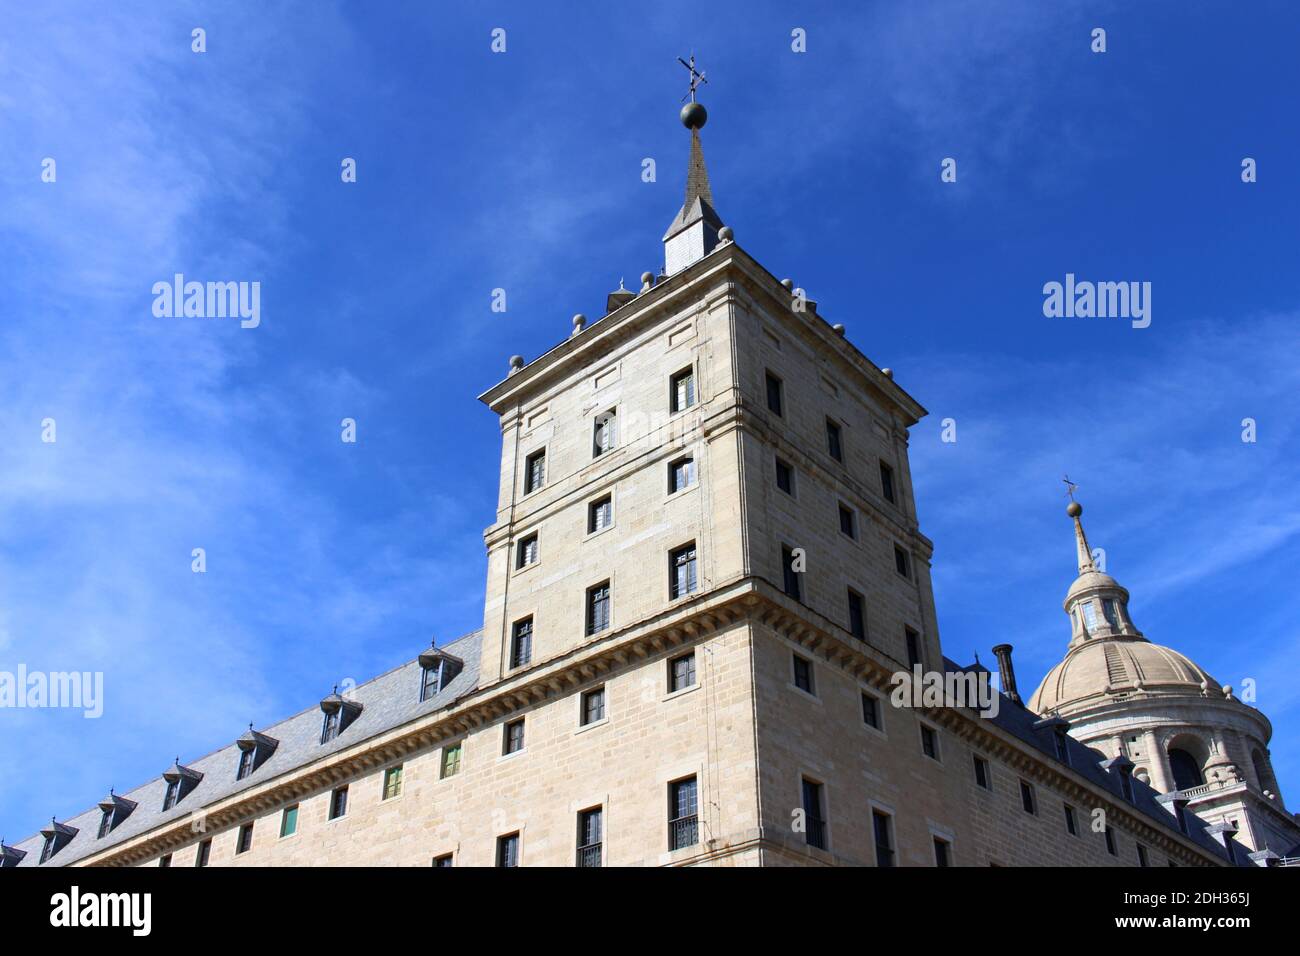 El Escorial, view of the tower Stock Photo